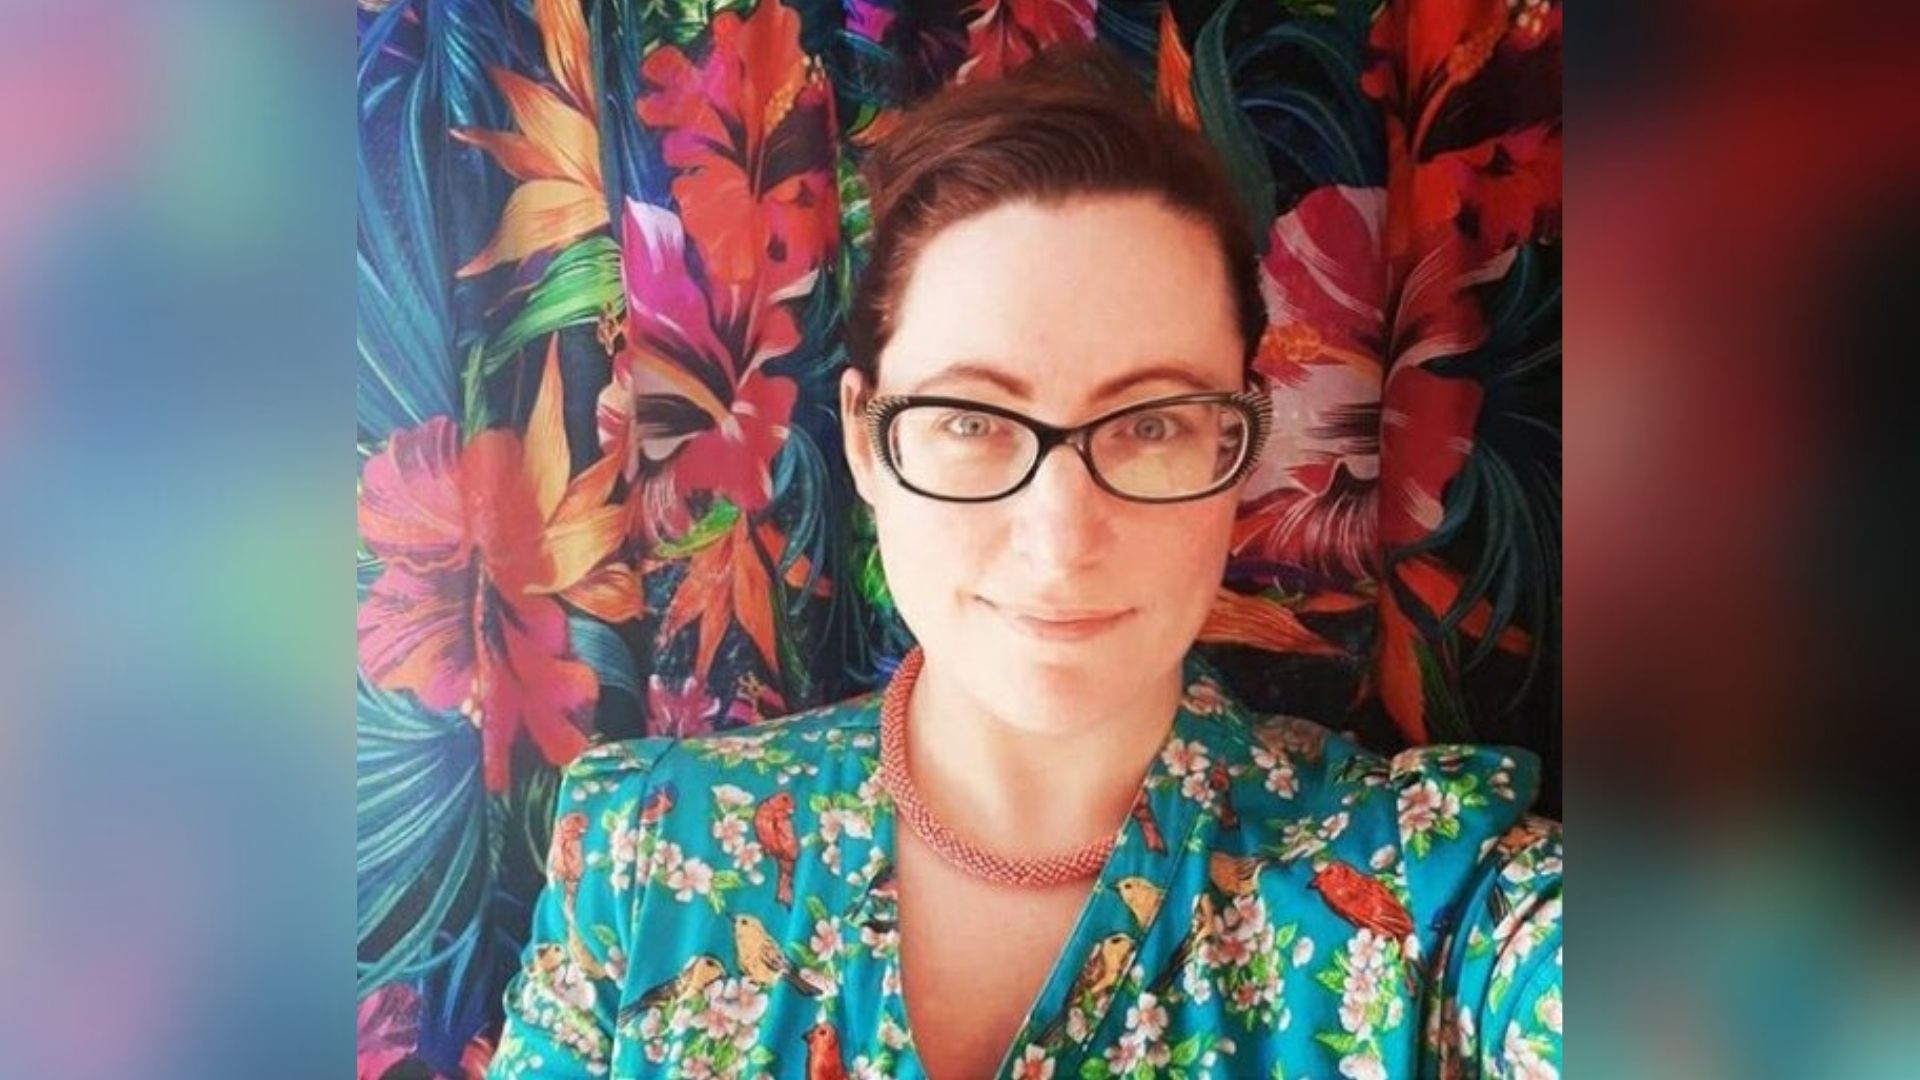 Rebecca, a woman who has curly brown hair pulled back from her face. She is wearing a floral print jacket and glasses and looking at the camera.